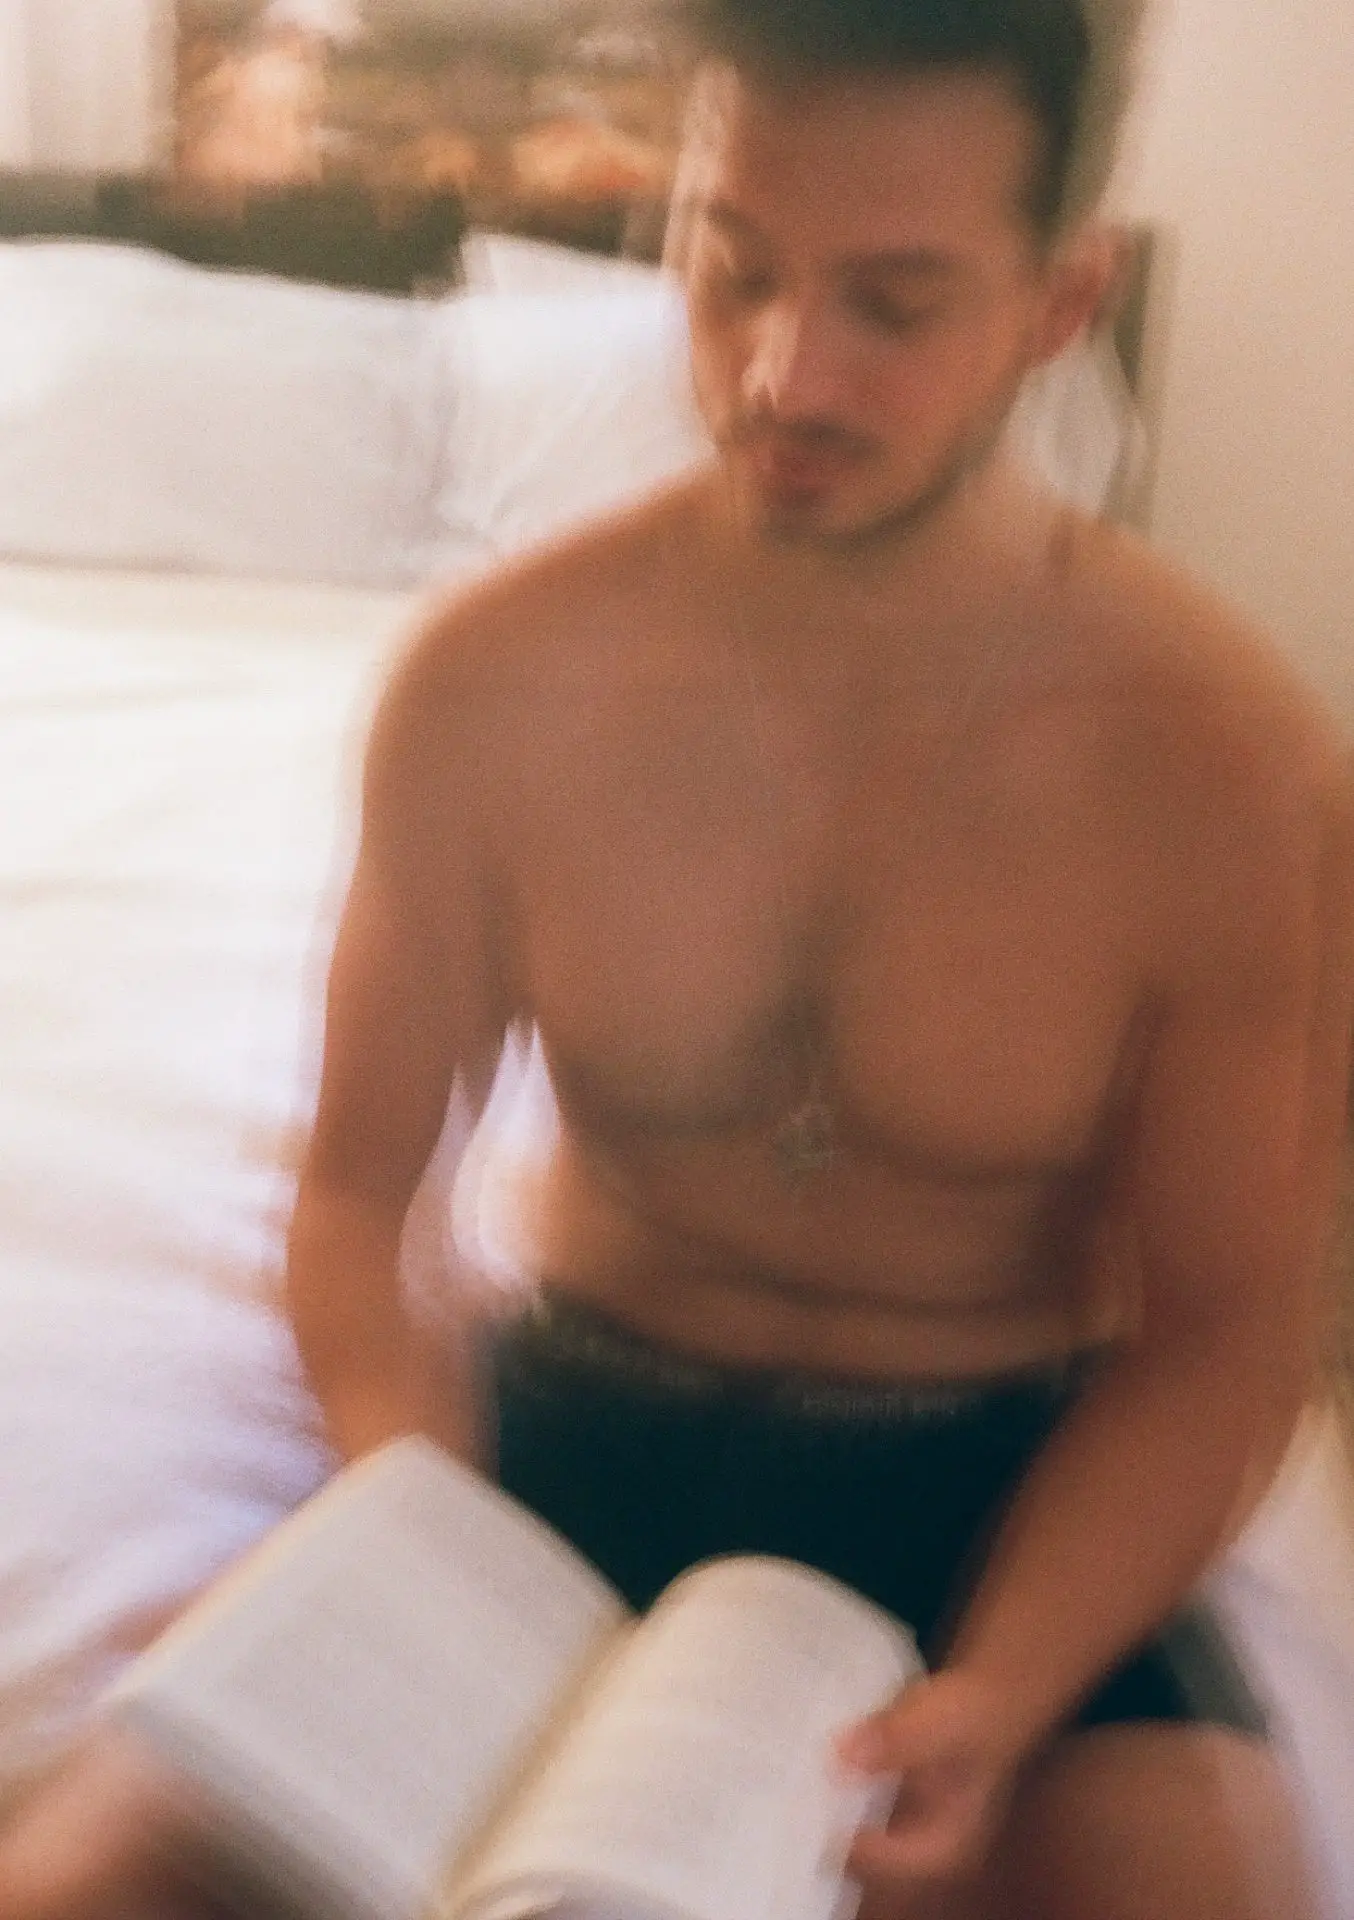 Male reading a novel thoughtfully